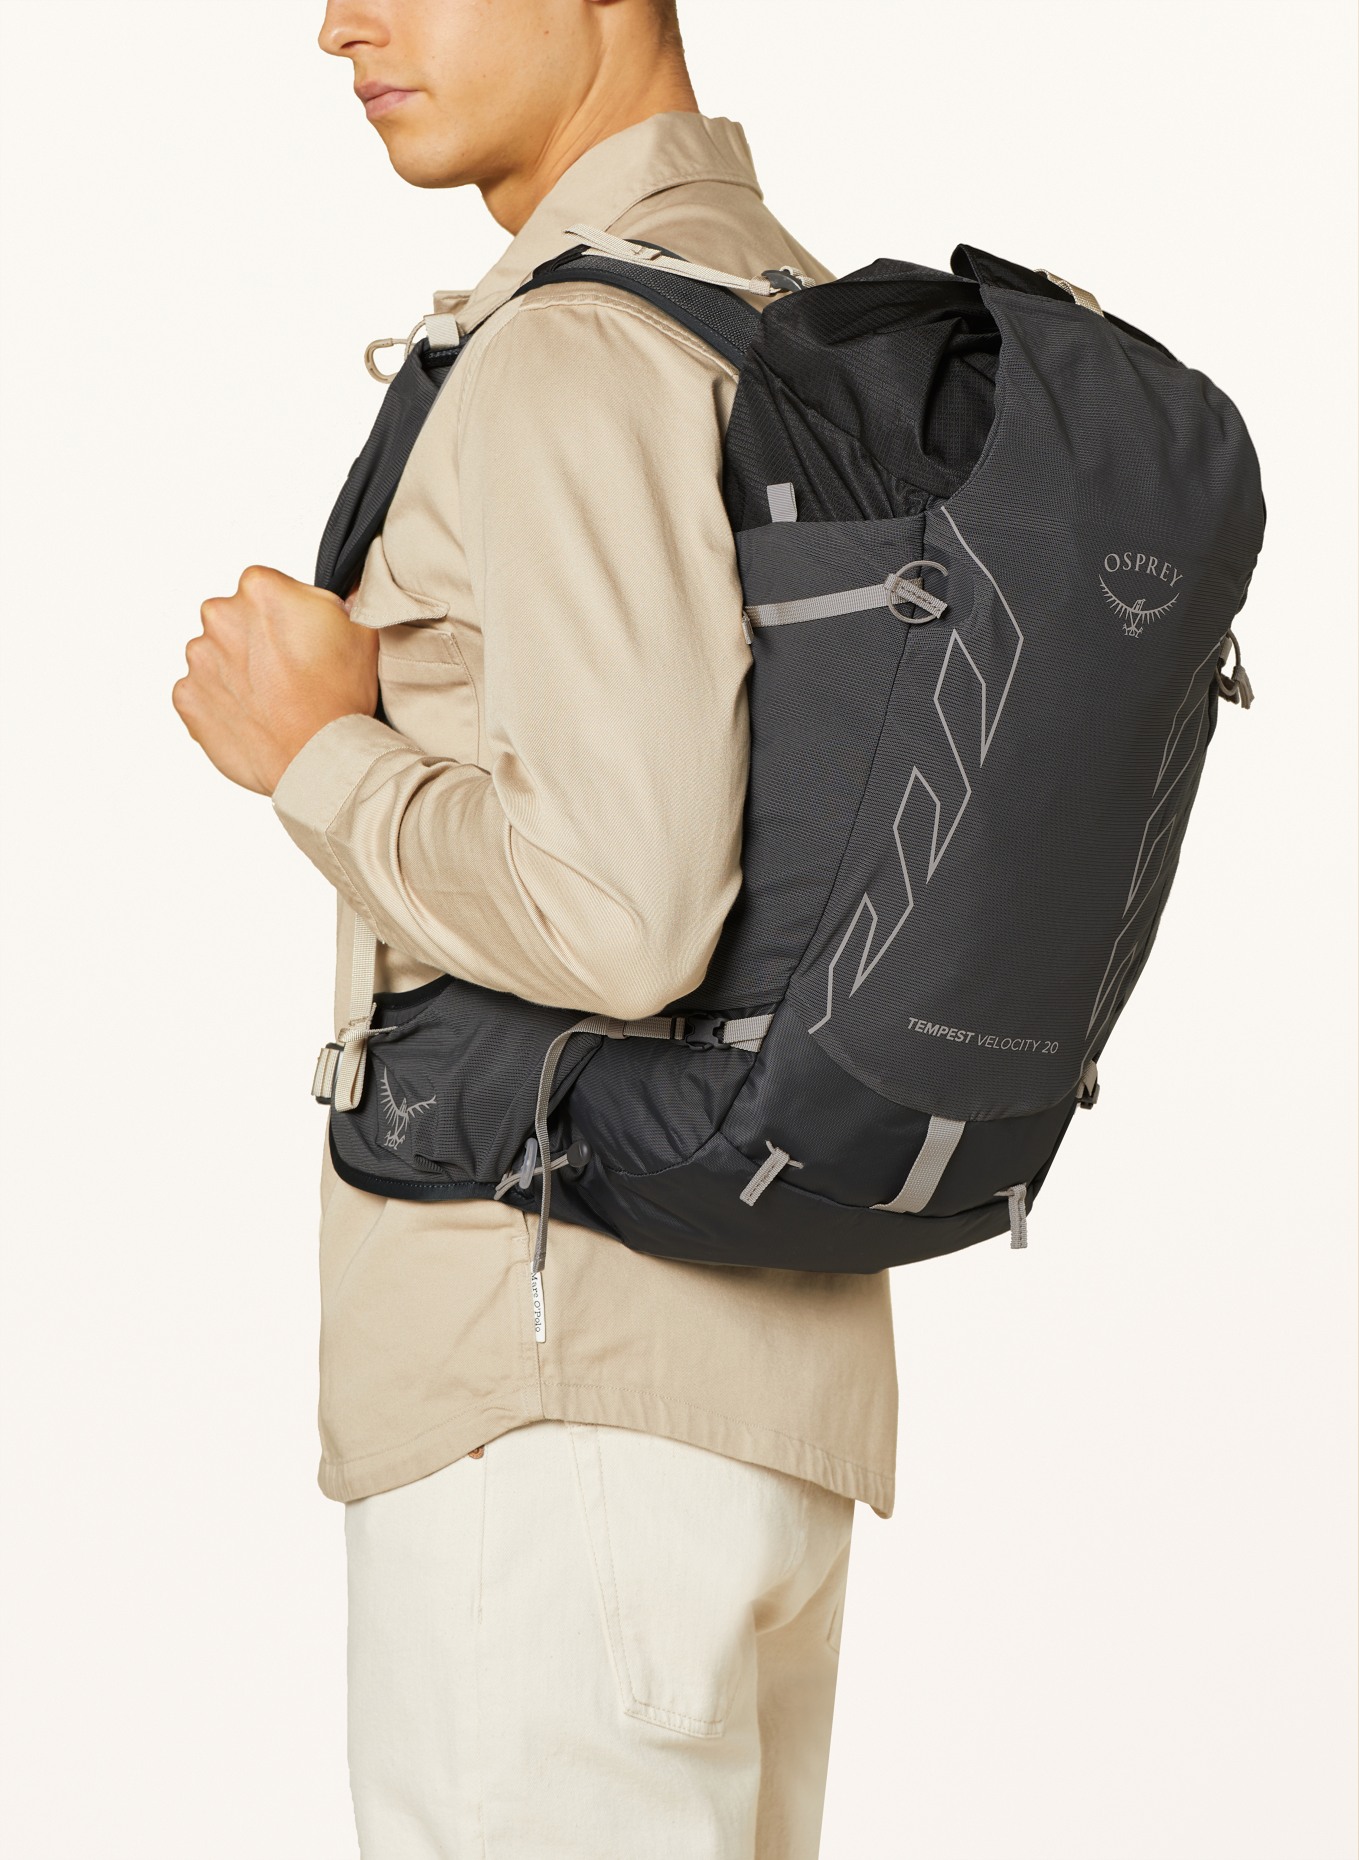 OSPREY Backpack TEMPEST VELOCITY 20 l, Color: GRAY (Image 4)